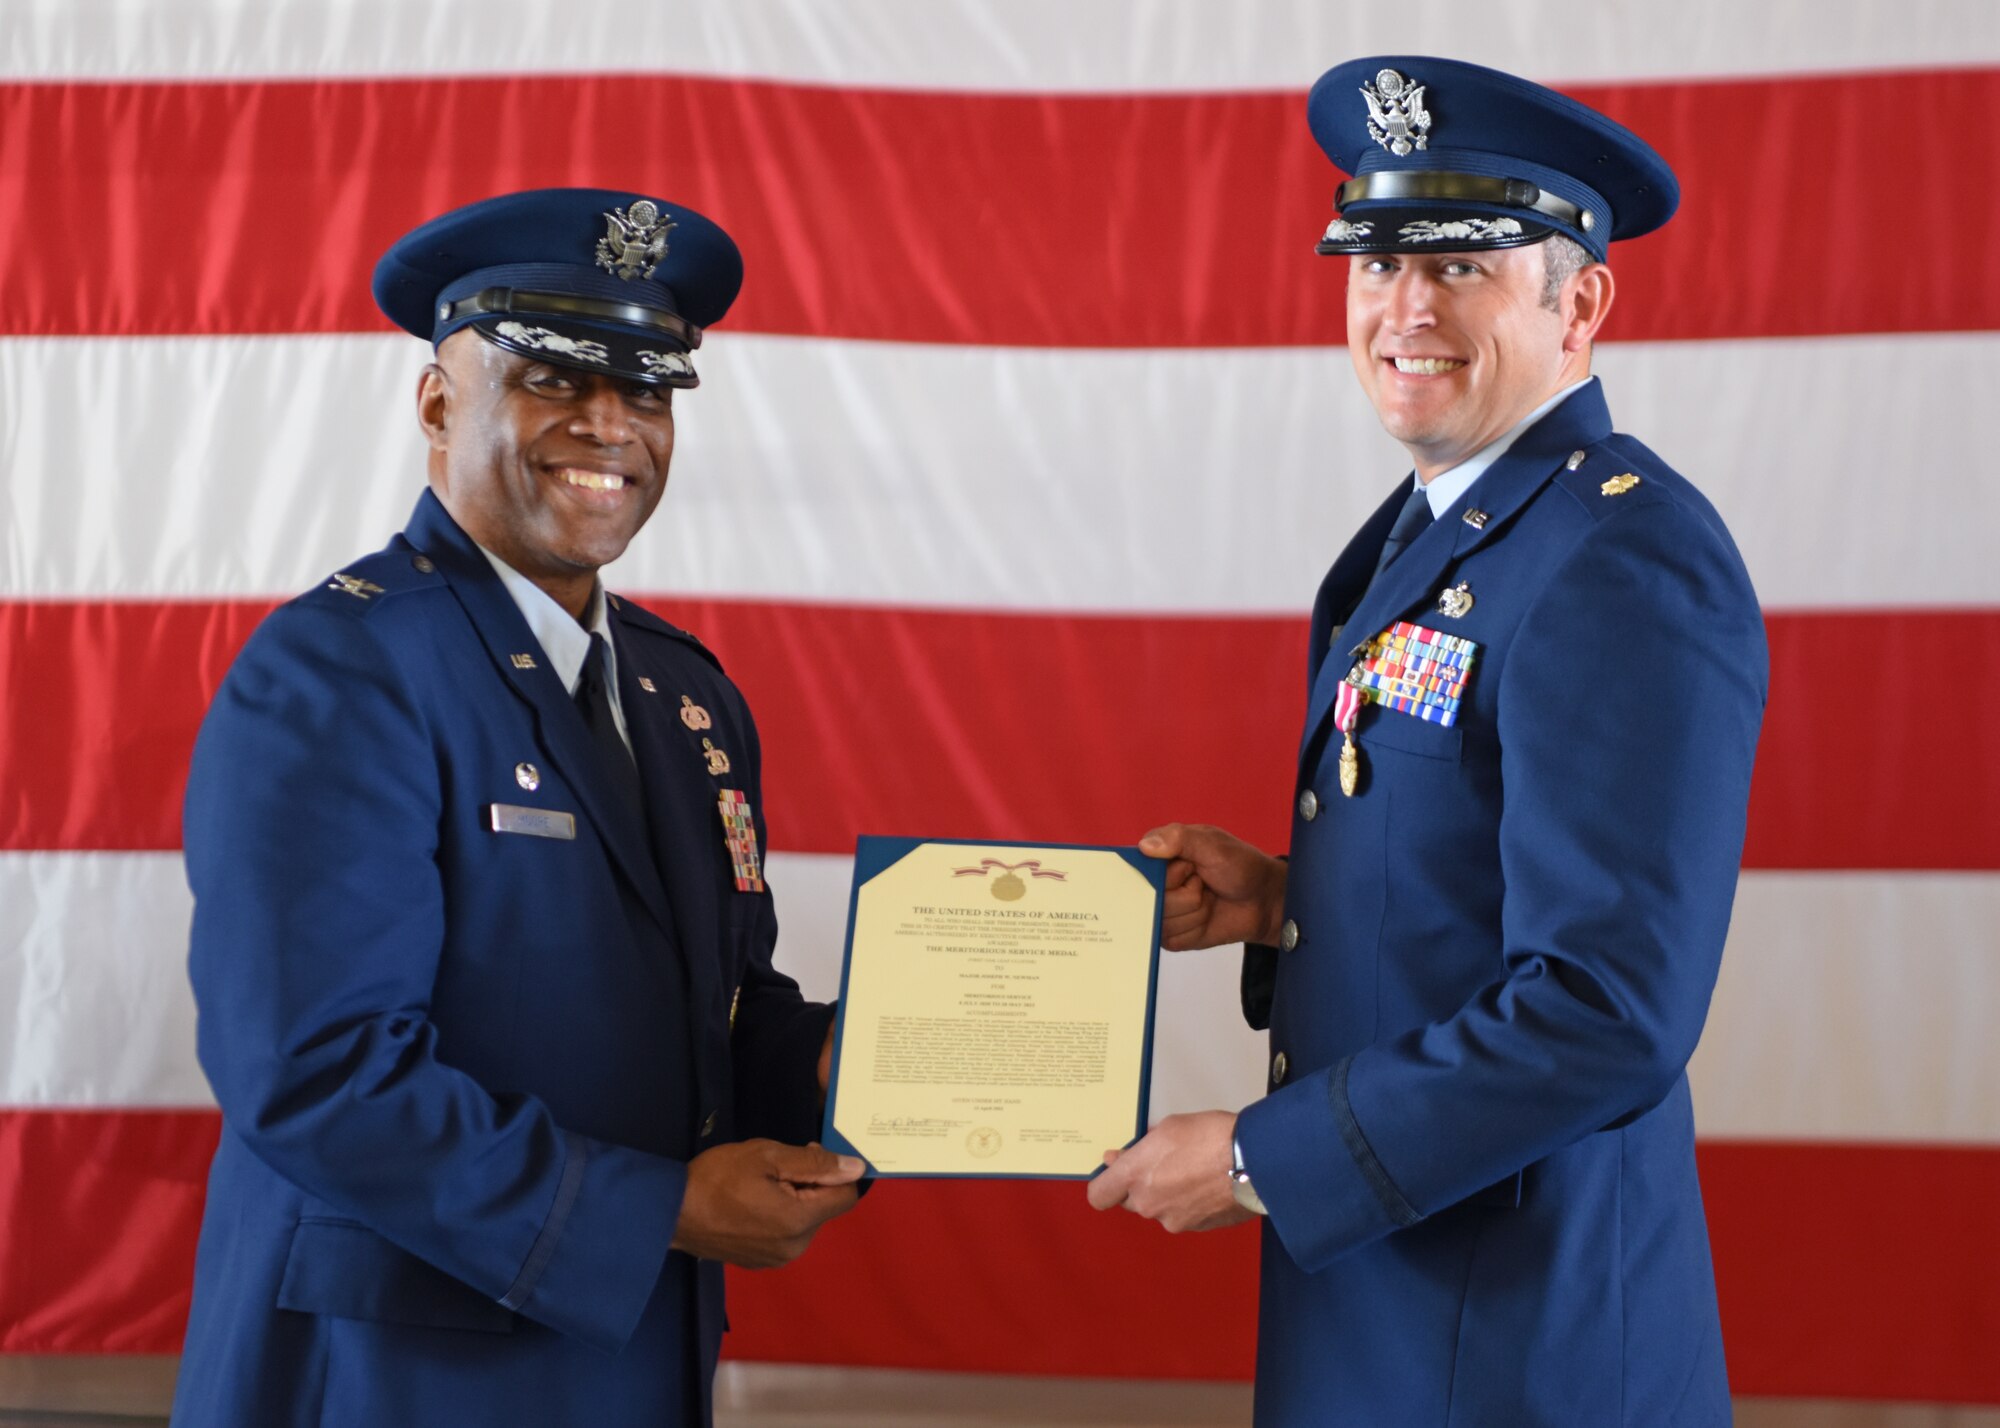 U.S. Air Force Col. Eugene Moore III, 17th Mission Support Group commander, (left) presents a Meritorious Service Medal to Maj. Joseph Freeman, 17th Logistics Readiness Squadron outgoing commander, at the 17th LRS change of command ceremony at Goodfellow Air Force Base, Texas, May 20, 2022. Freeman served through both a pandemic and Winter Storm Uri and led the 17th LRS with excellence. (U.S. Air Force photo by Senior Airman Ethan Sherwood)